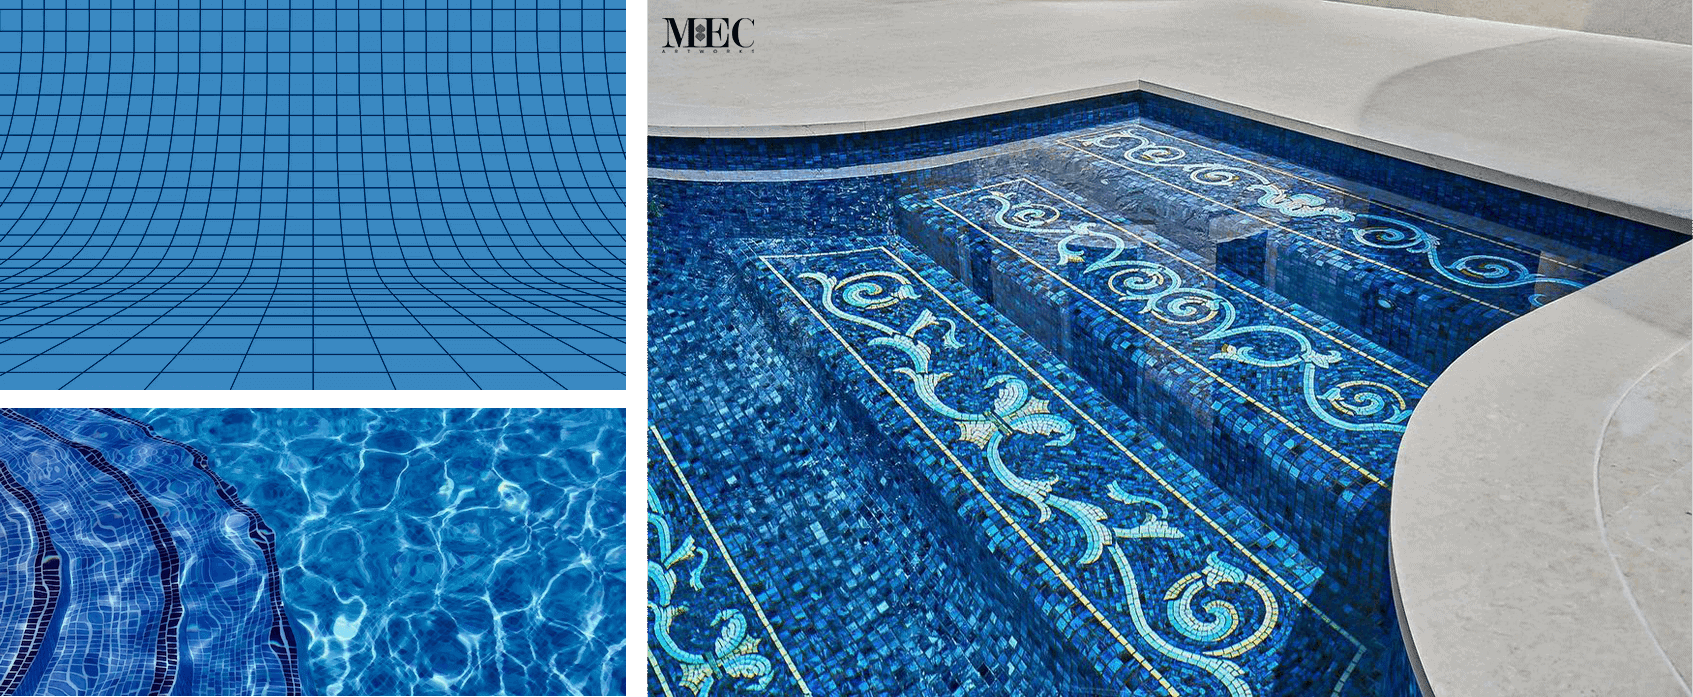 collage of 3 images showing how perfectly mosaic tiles can cover the curved surfaces in a swimming pool